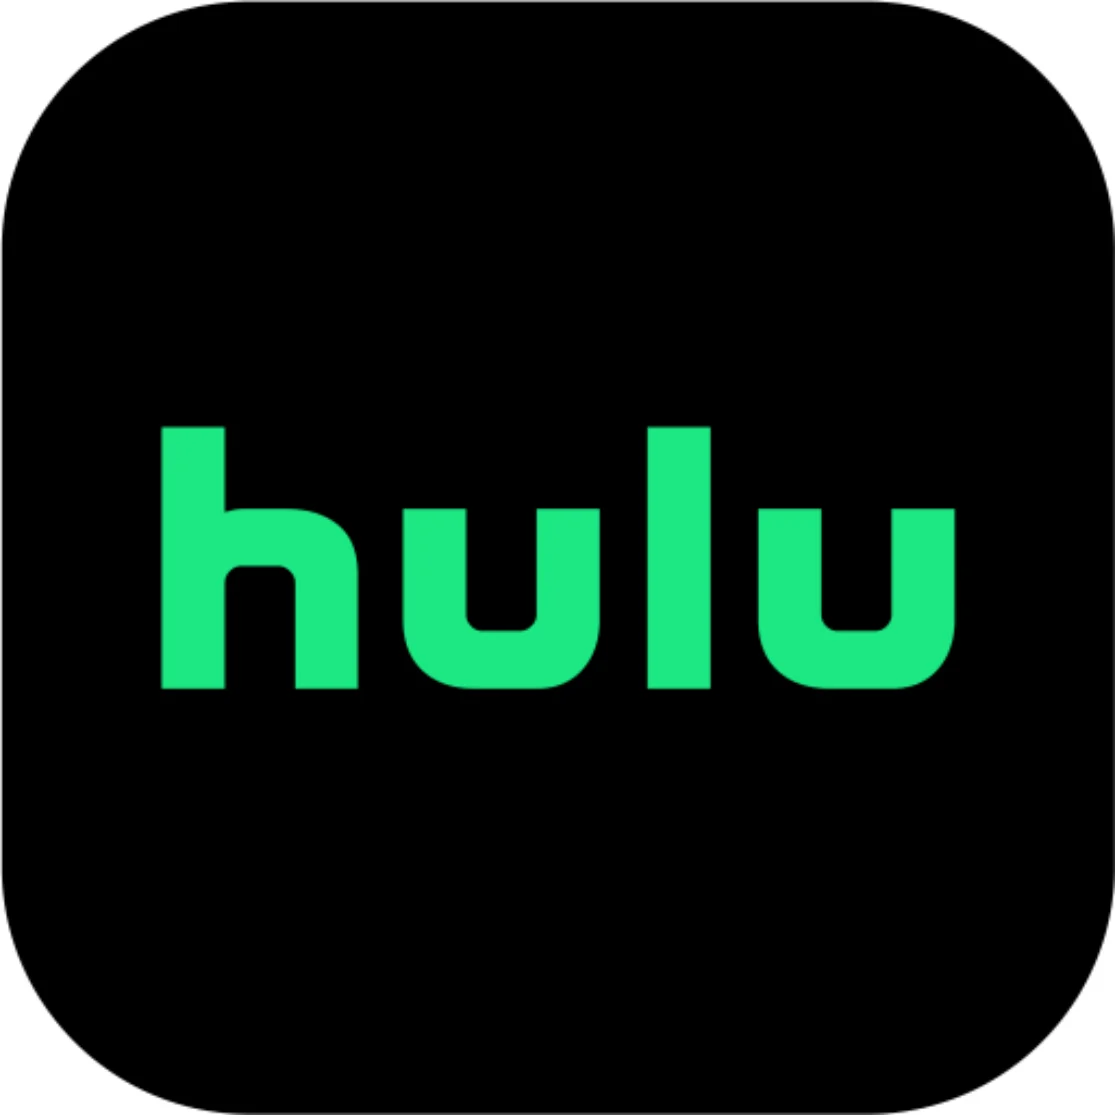 15% Off - Hulu Annual Subscription - $79.99/Year + 30-Day Free Trial